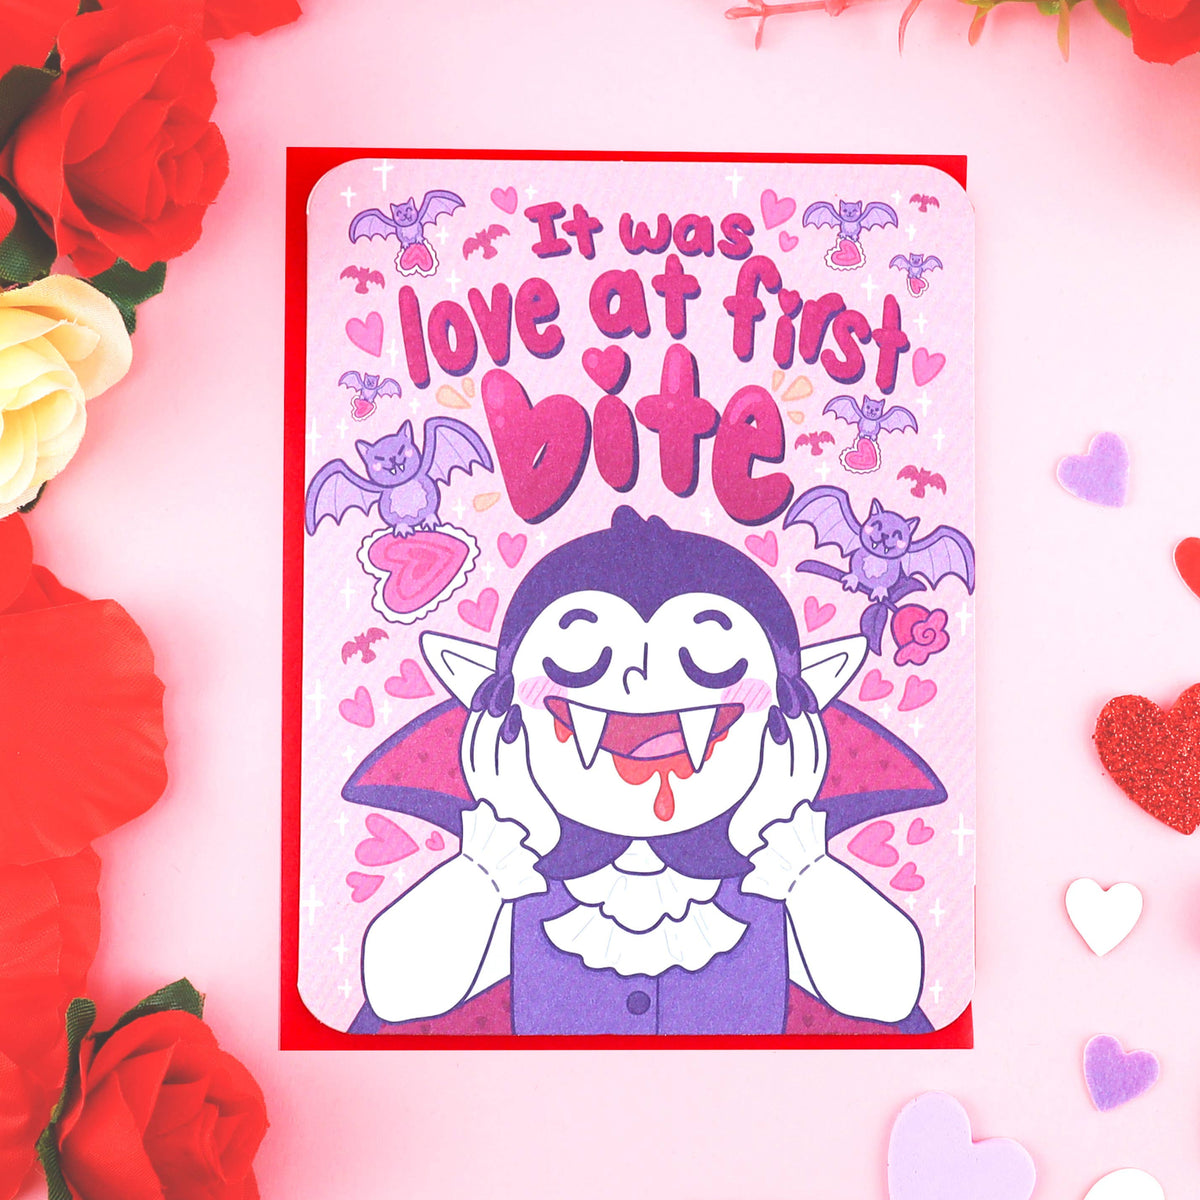 Love At First Bite Funny Vampire Anniversary Love Card